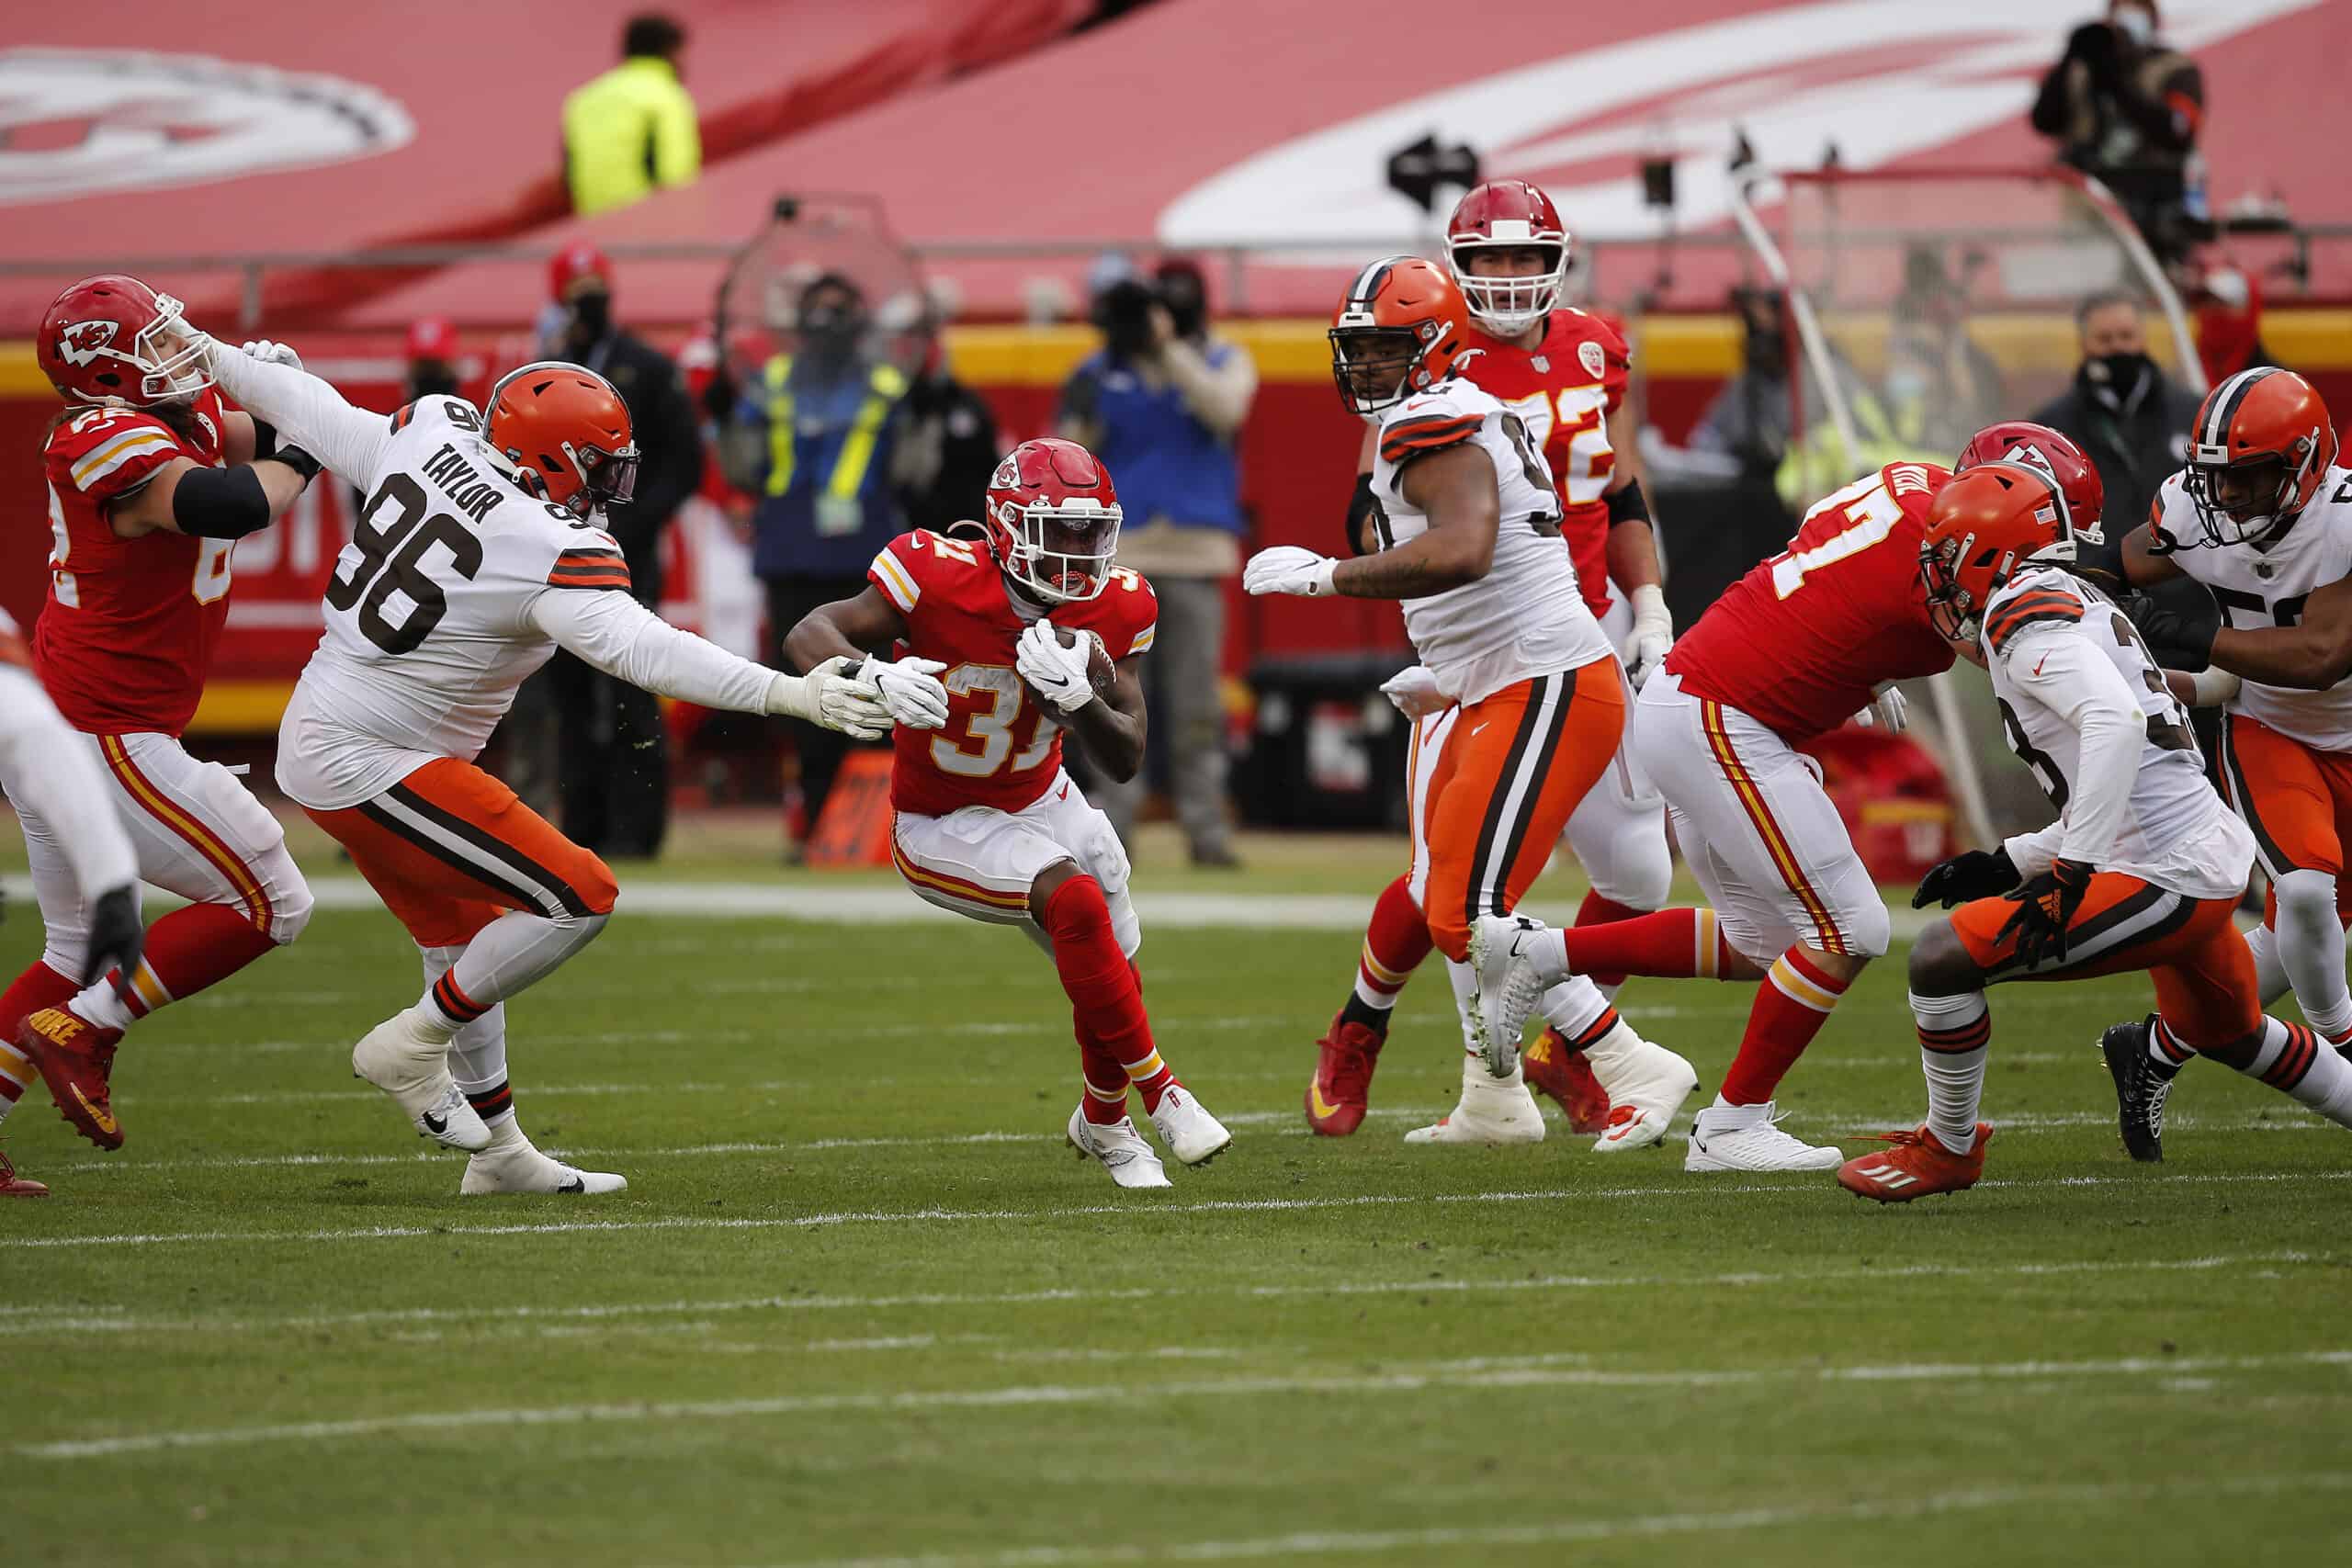 Running back Darrel Williams #31 of the Kansas City Chiefs carries the football against the defense of the Cleveland Browns at Arrowhead Stadium on January 17, 2021 in Kansas City, Missouri.